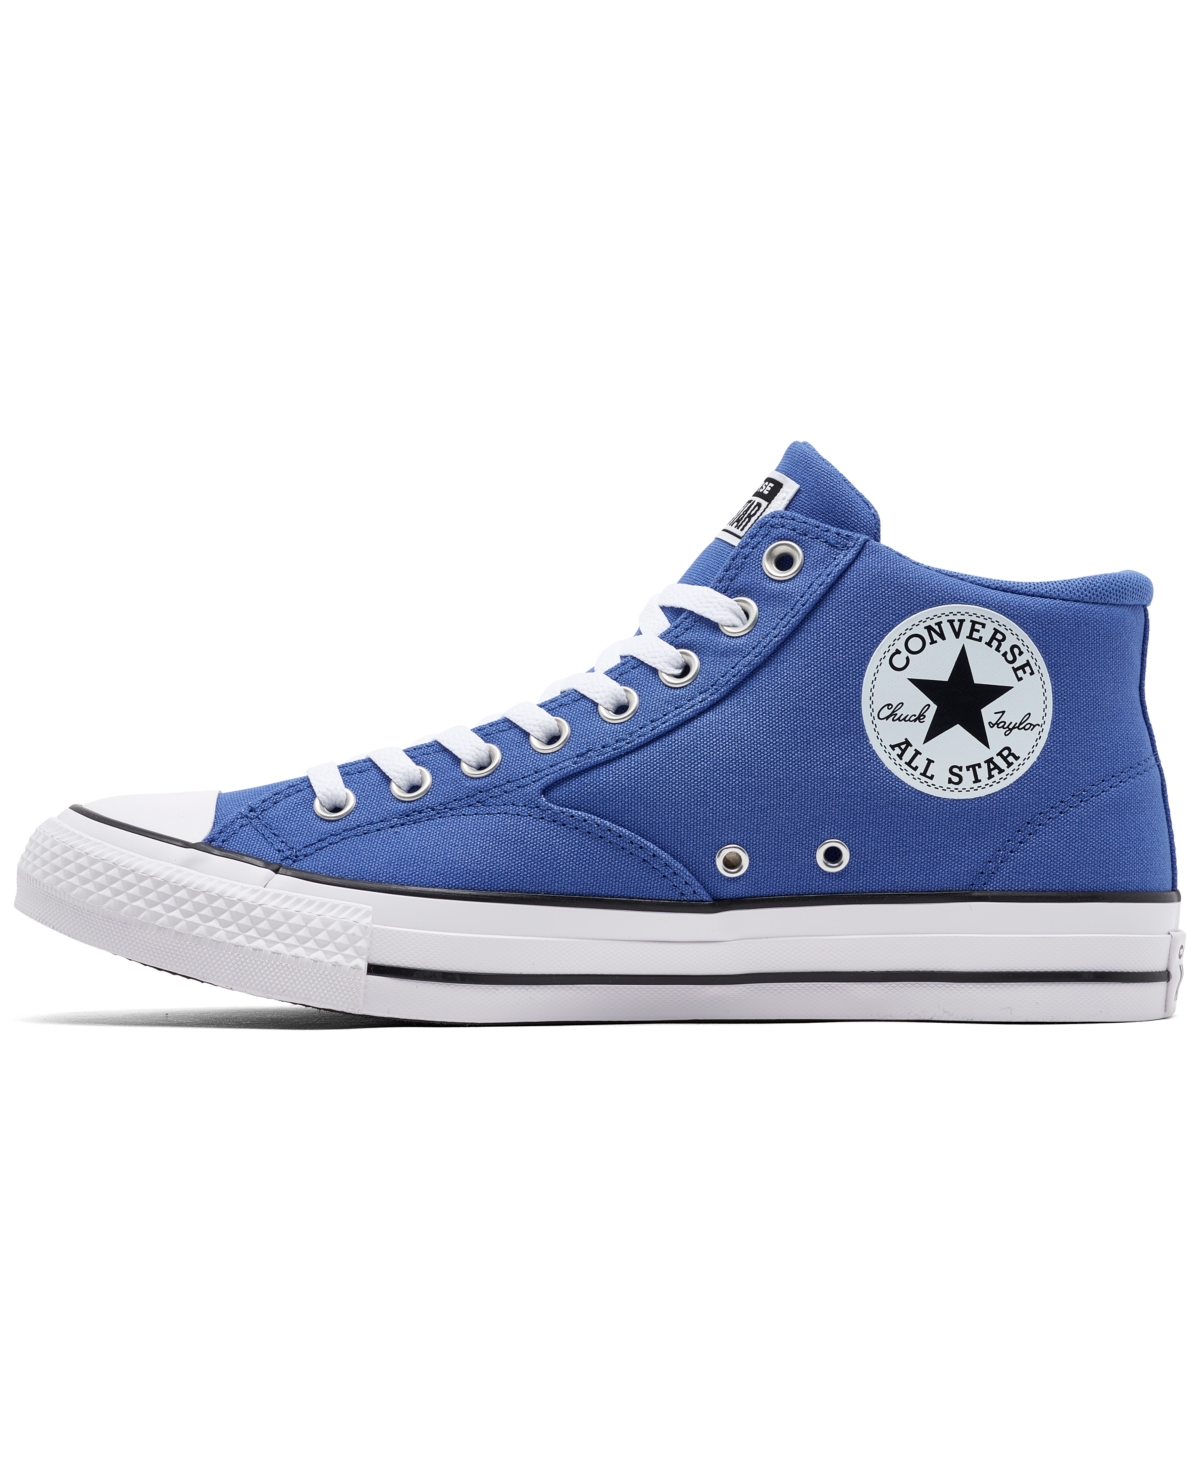 Shop Converse Men's Chuck Taylor All Star Malden Street Vintage-like Athletic Casual Sneakers From Finish Line In Ancestral Blue,white